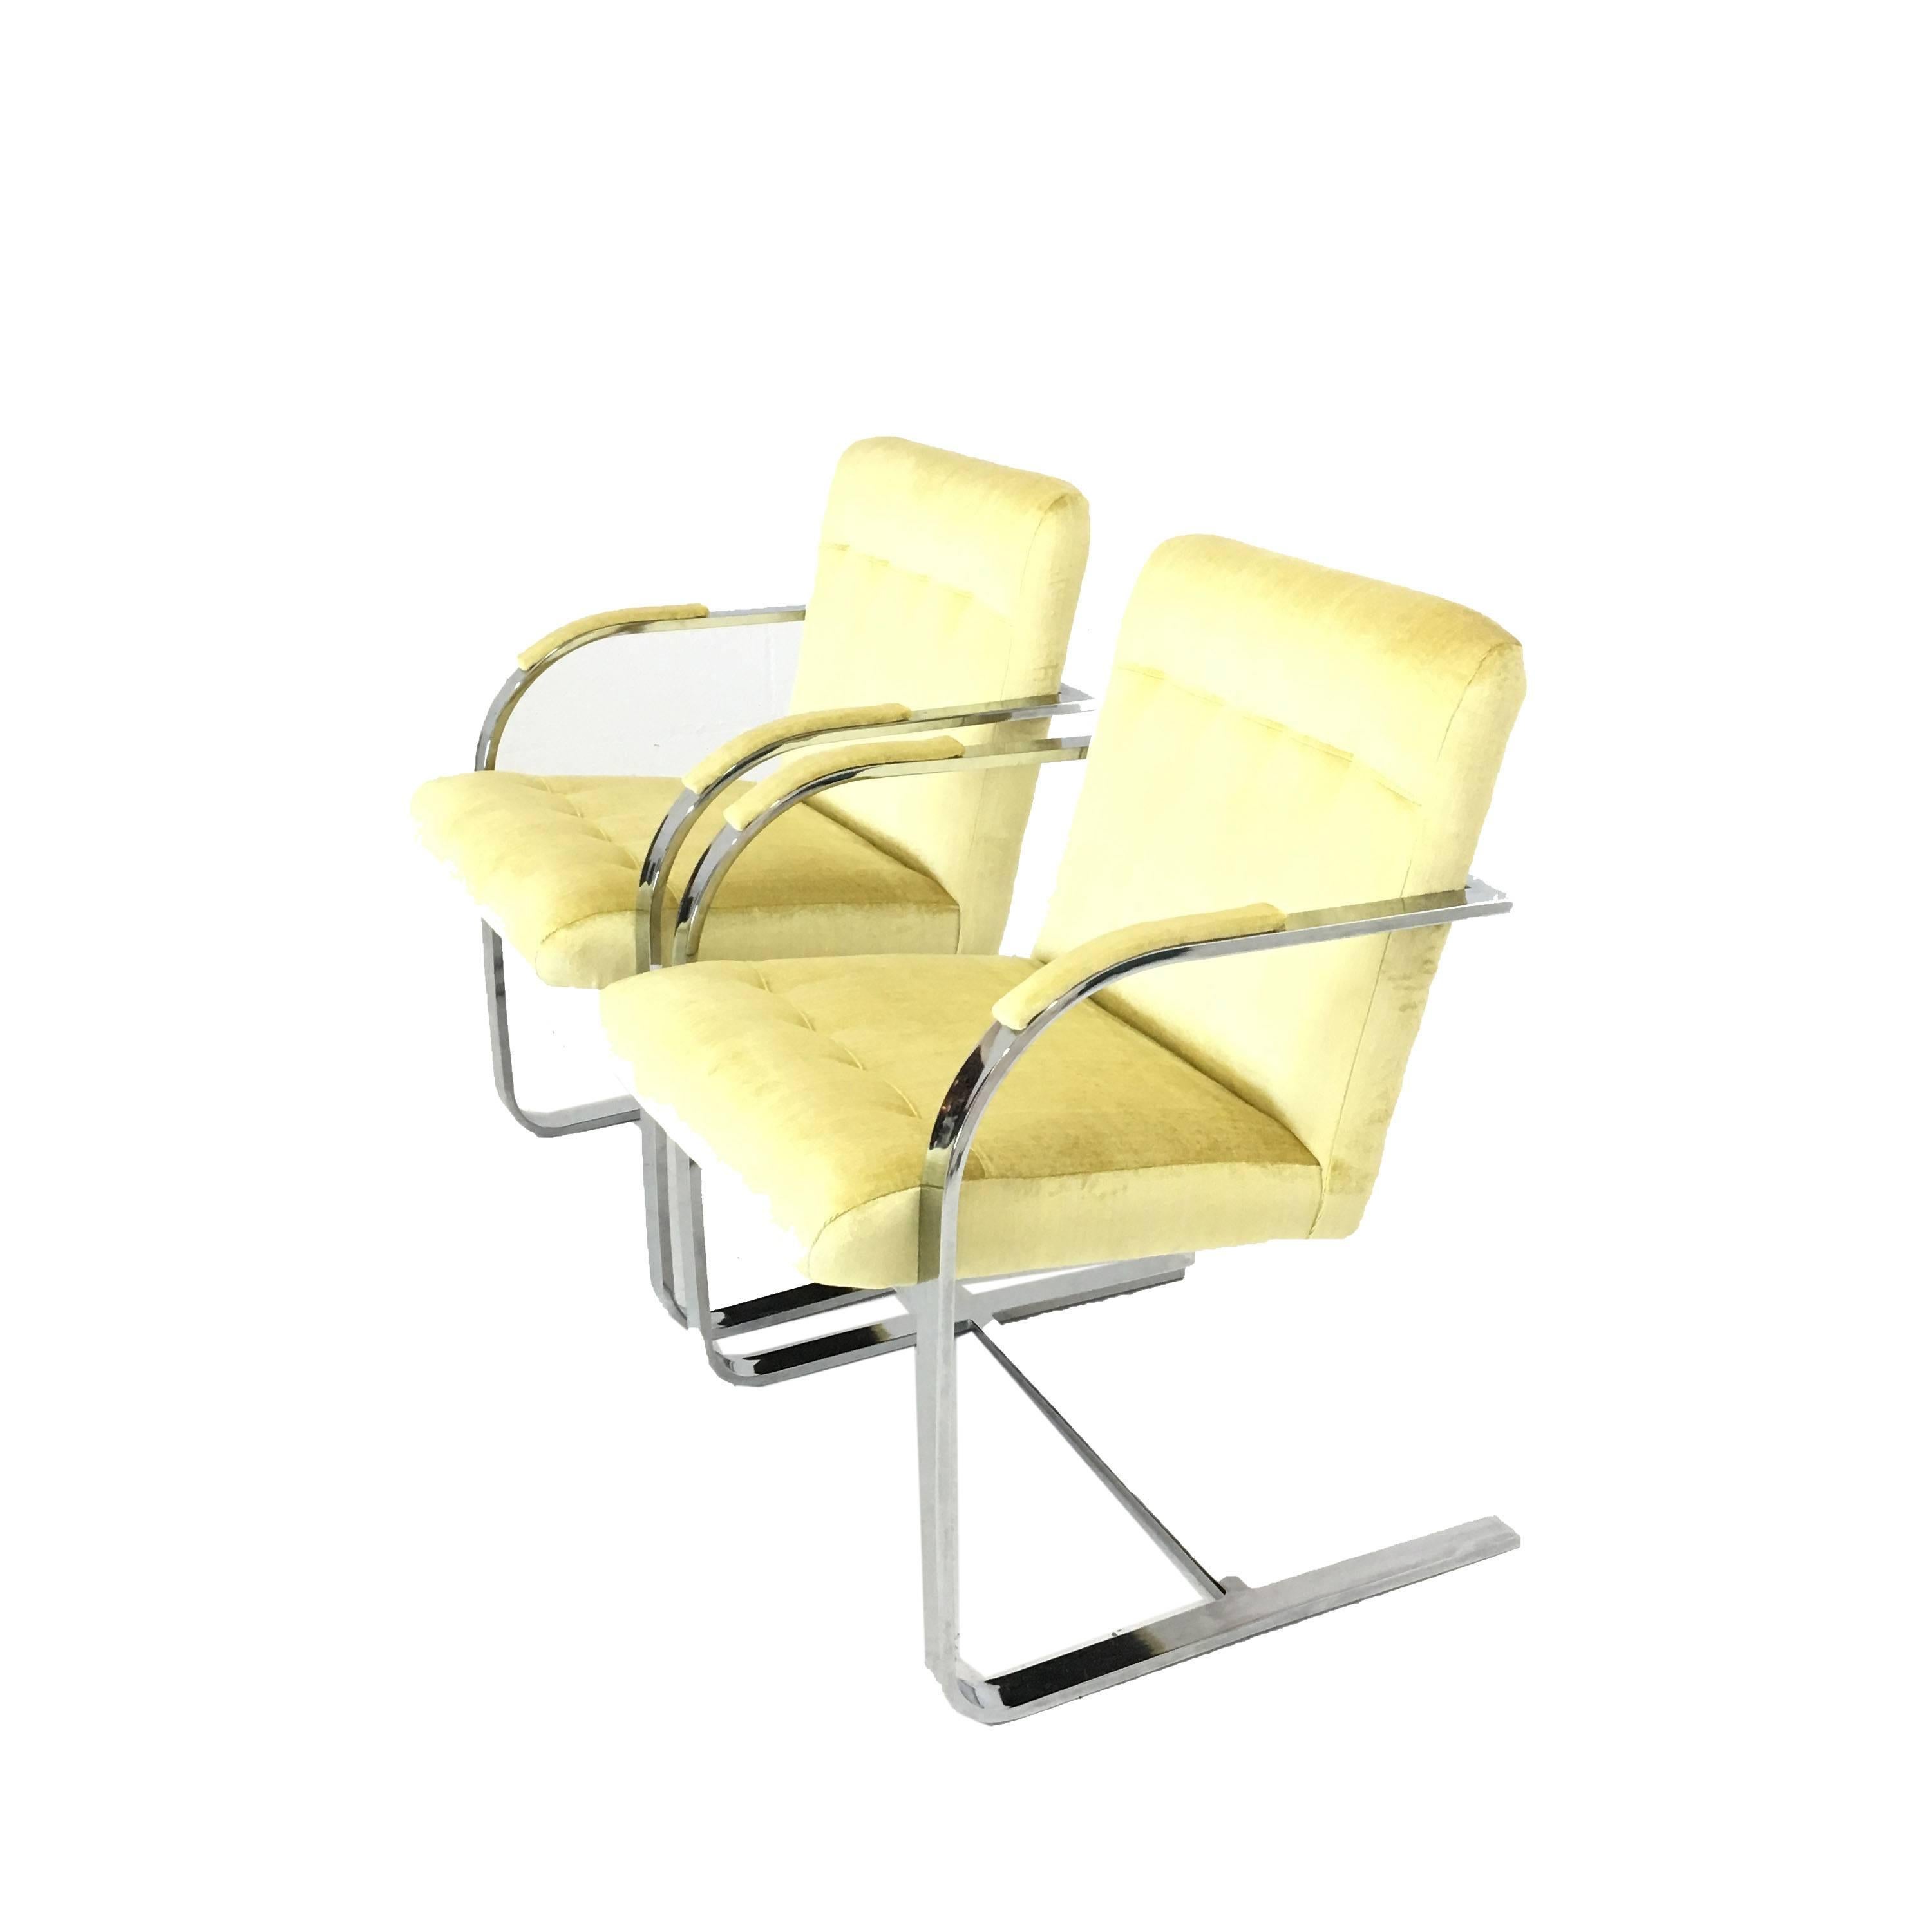 A pair of Mid-Century Modern Chrome framed occasional chairs newly upholstered in a striated yellow velvet. Arms each have a velvet pad for comfort and chairs have a slight rock backwards and forwards. Super comfortable! Price is per item. Age